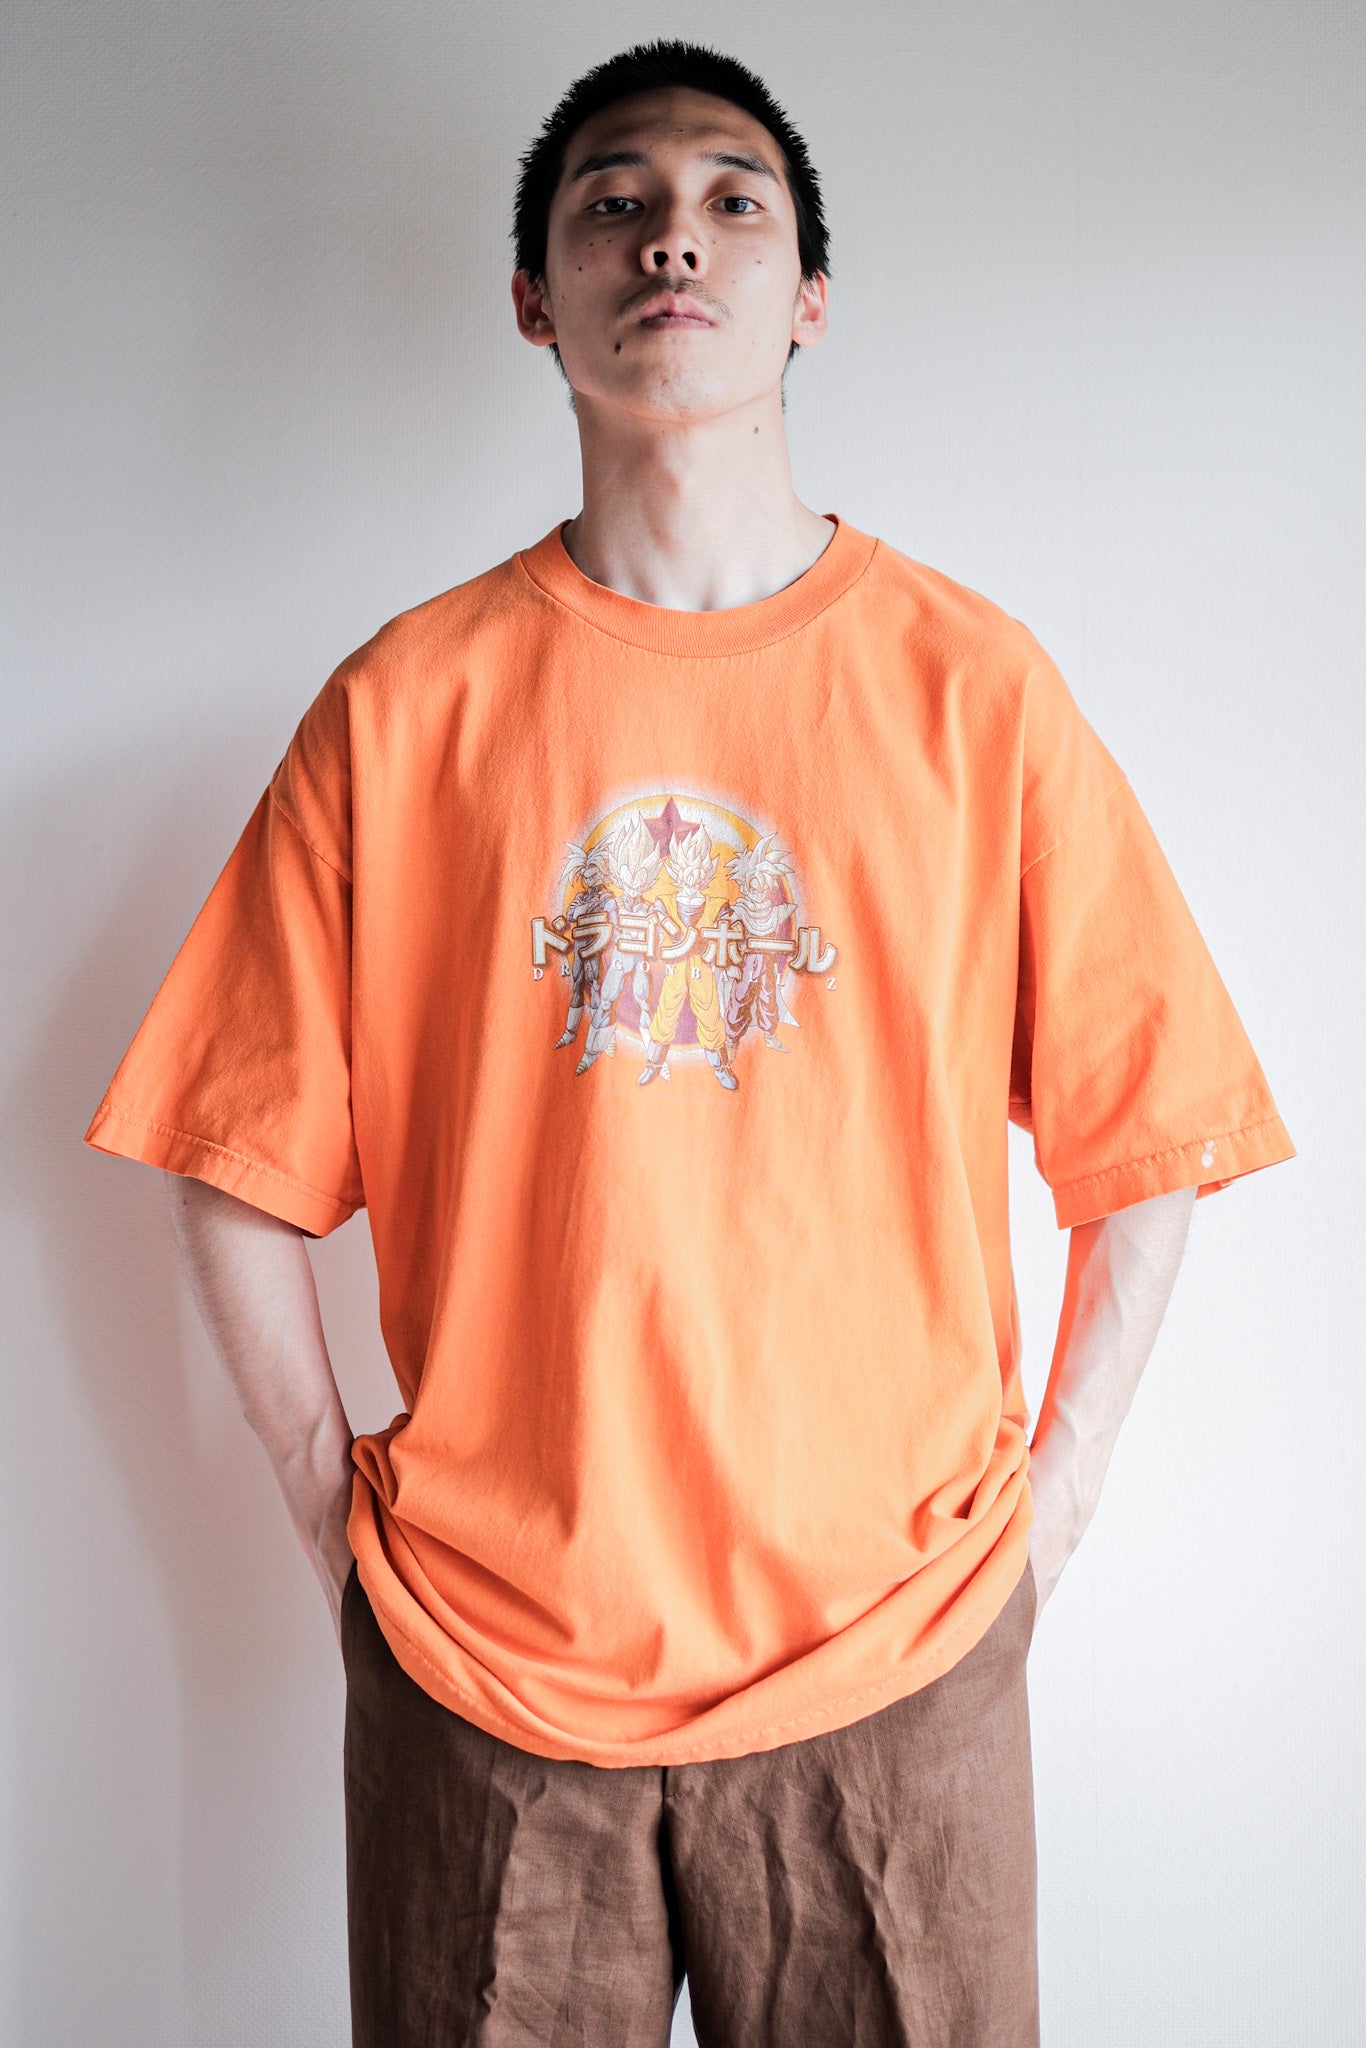 [~ 90's] Vintage Anime Print T-Shirt Size.xl "Dragon Ball" "Made in U.S.A."